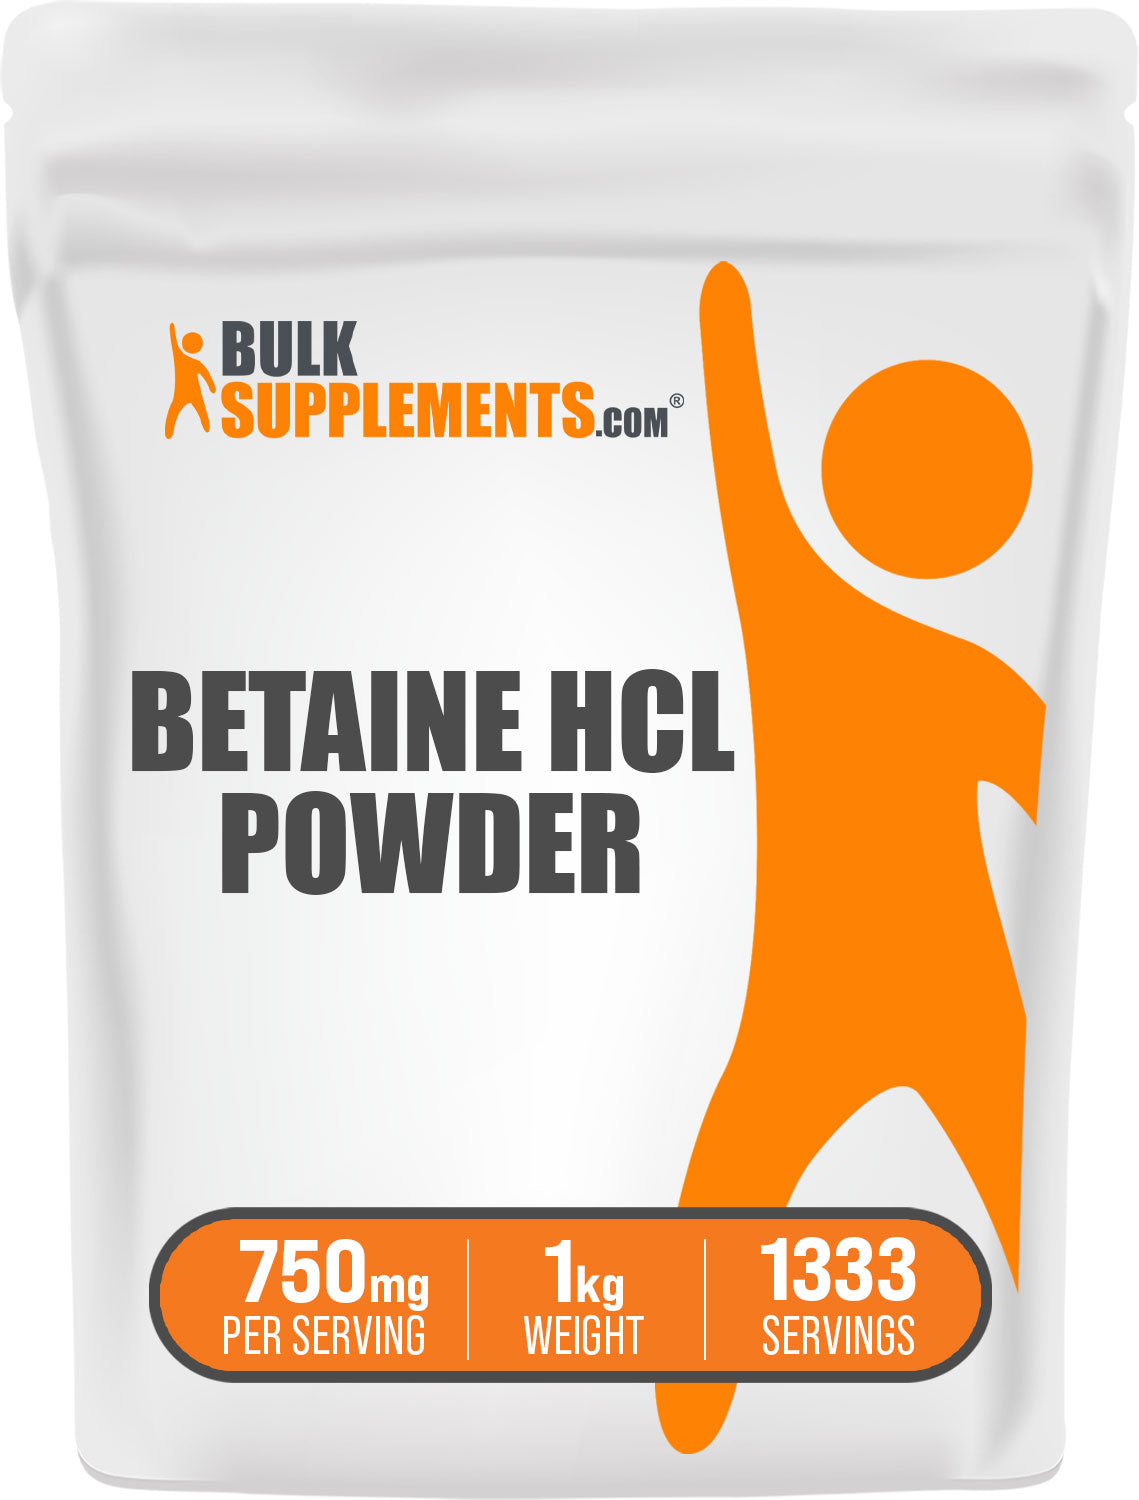 1kg betaine hcl